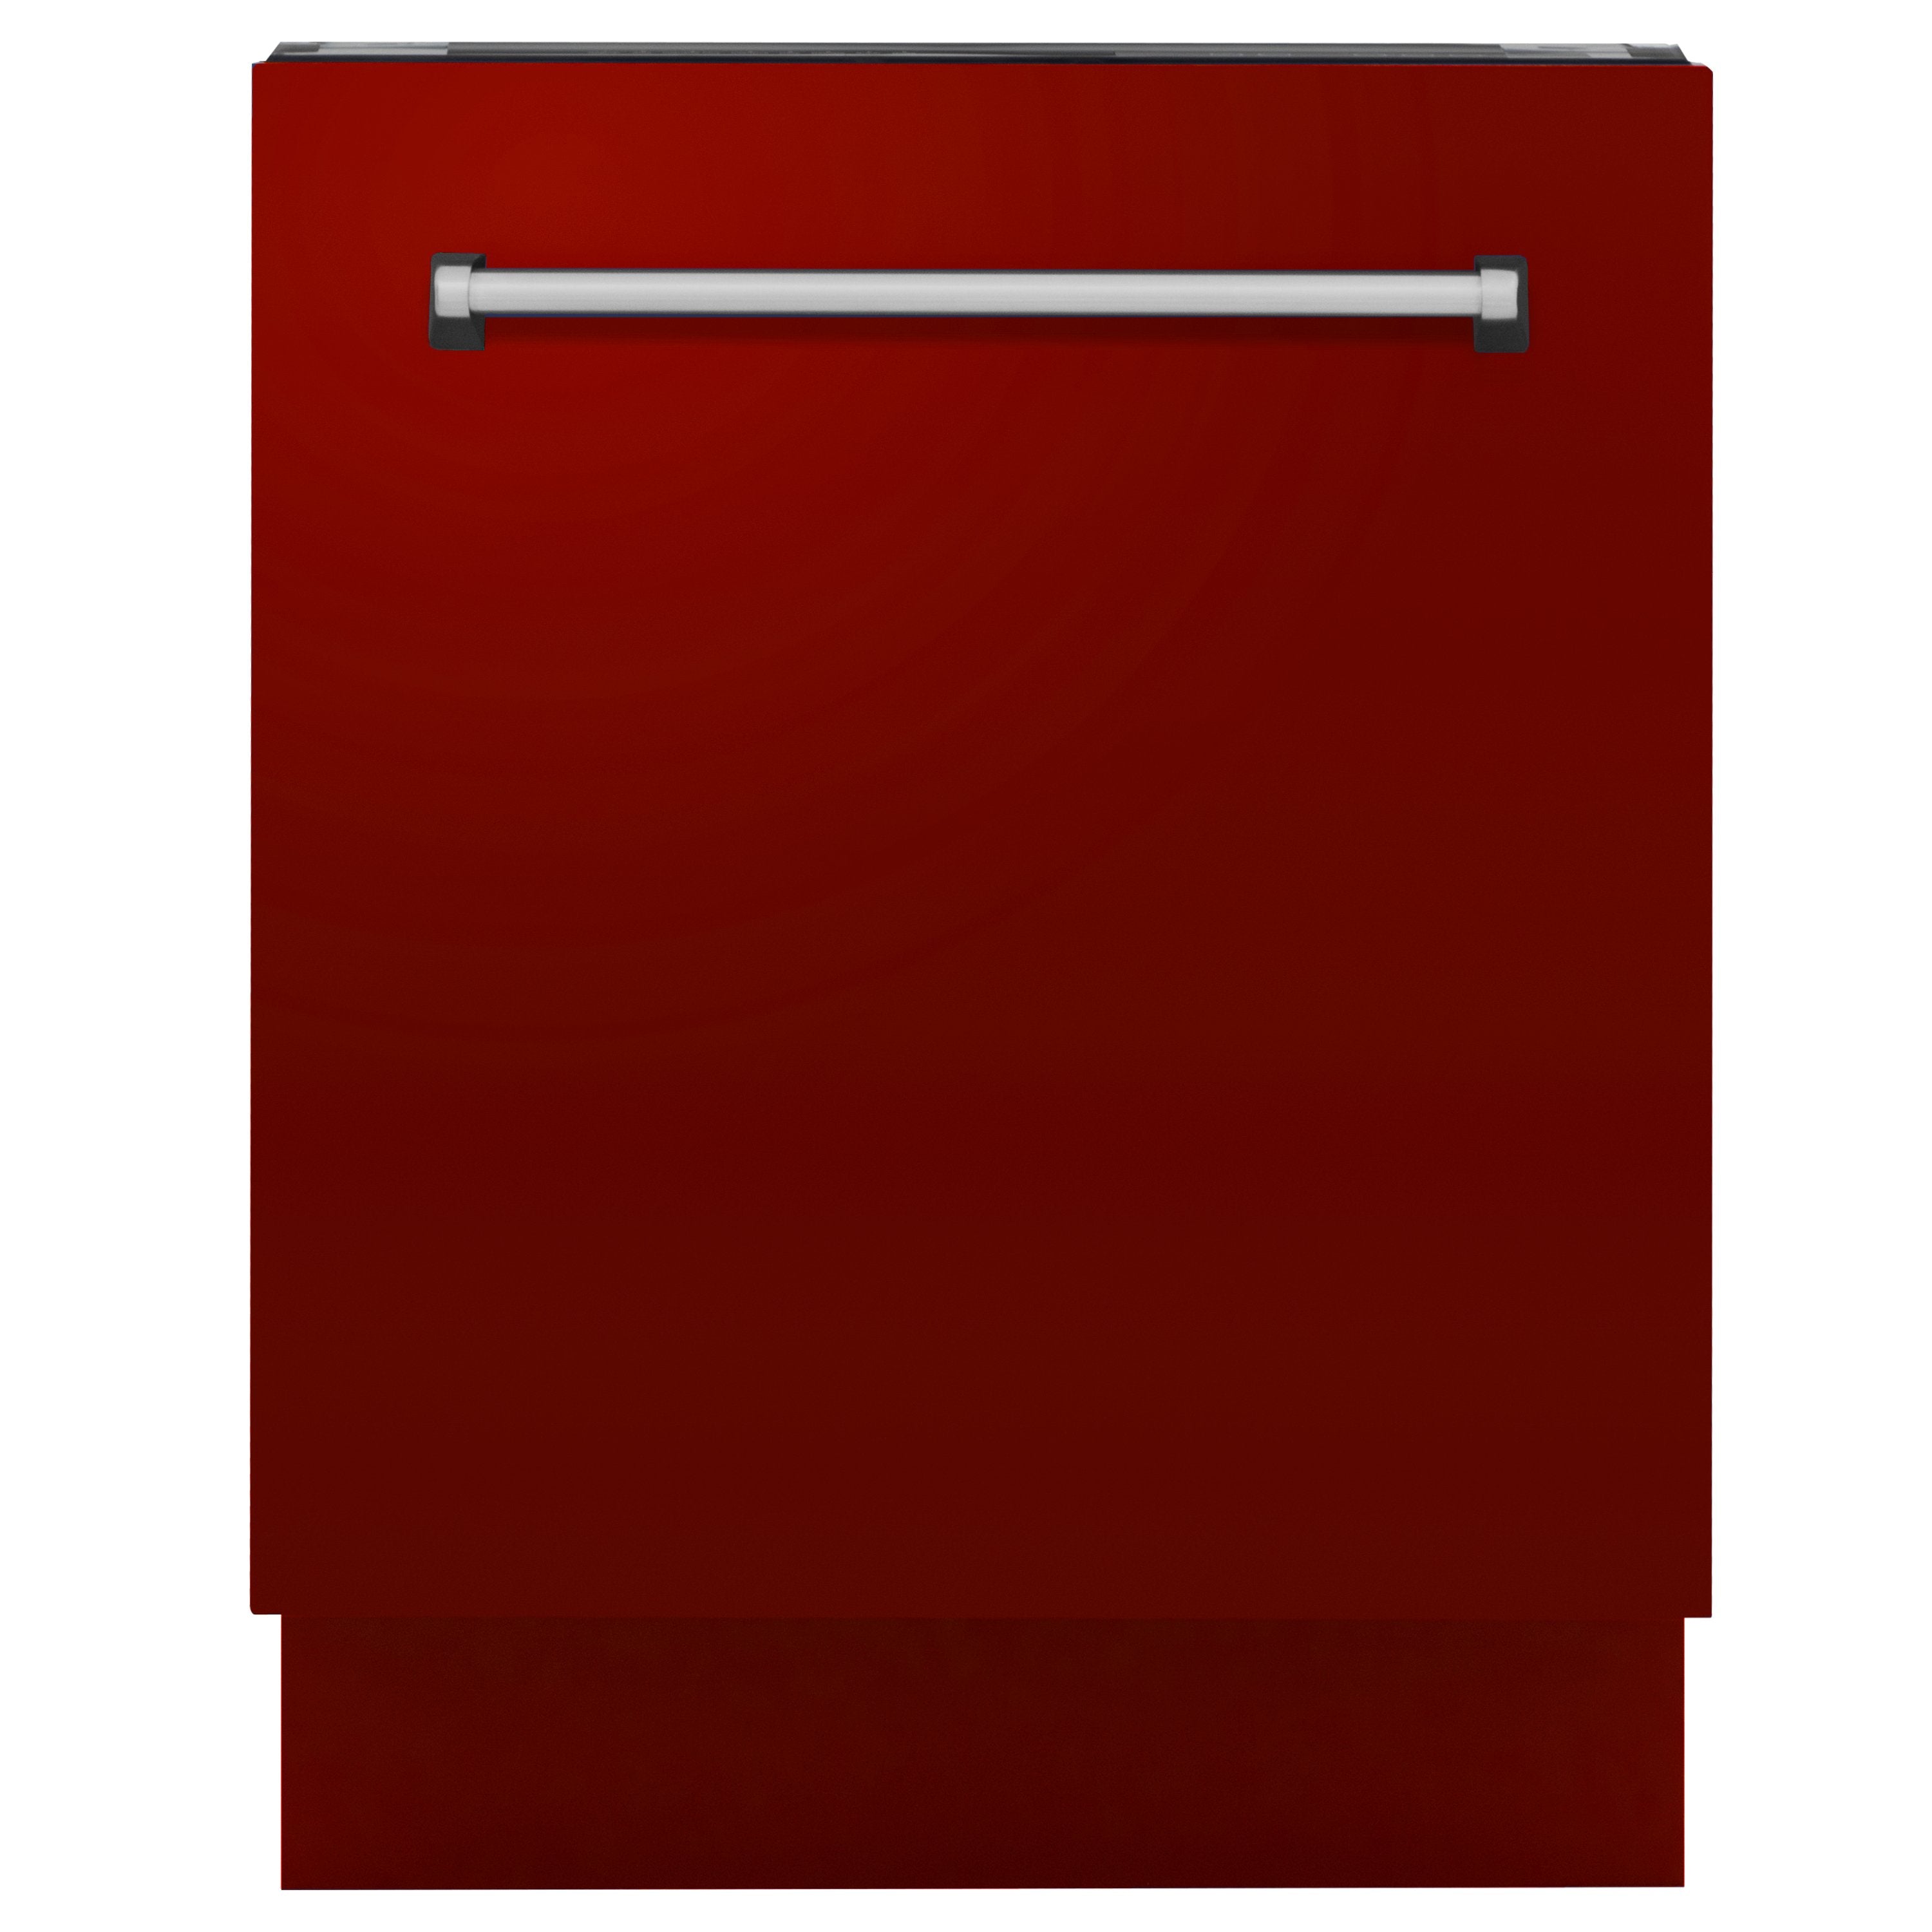 ZLINE 24 in. Top Control Tall Dishwasher in Red Gloss with 3rd Rack